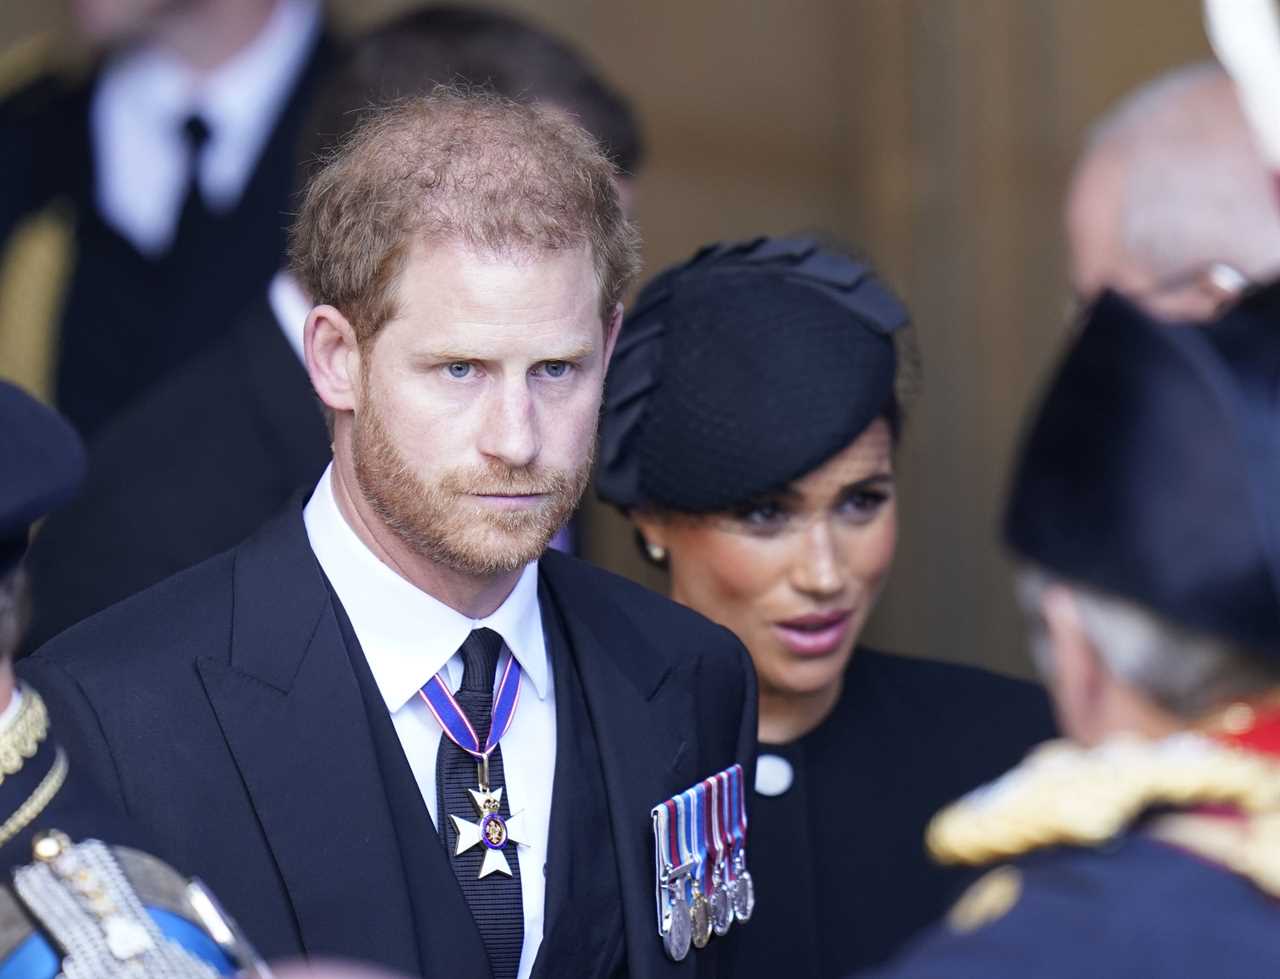 Clue in Prince Harry’s memoir that exposes his ‘deep shame’, according to expert who reveals why book is so ‘nasty’